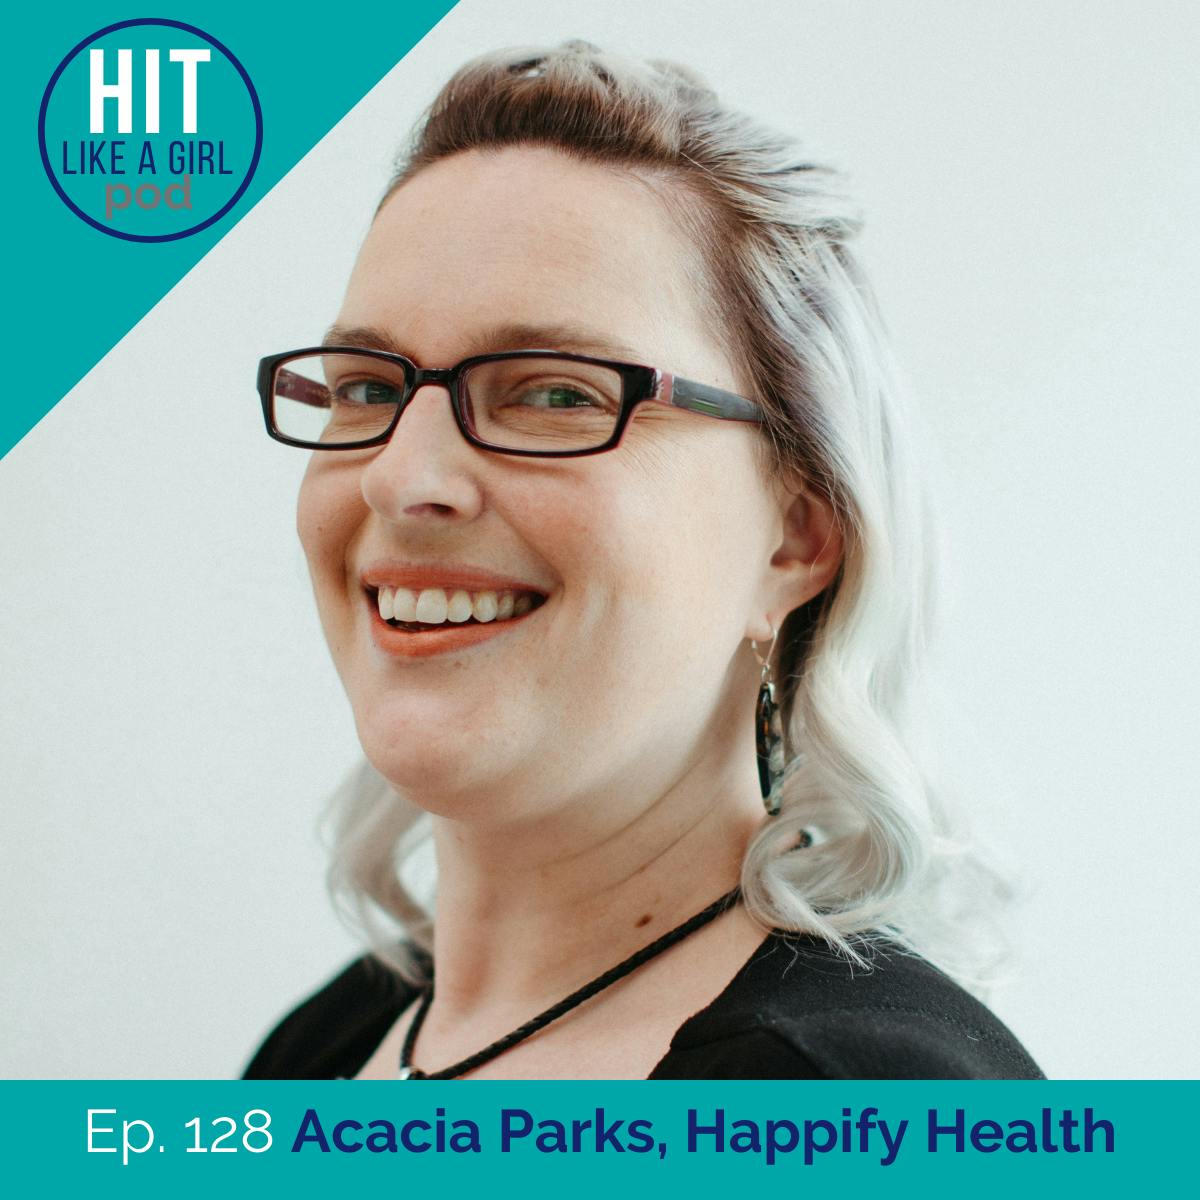 Acacia Parks shares how mental health and behavior choices are intertwined